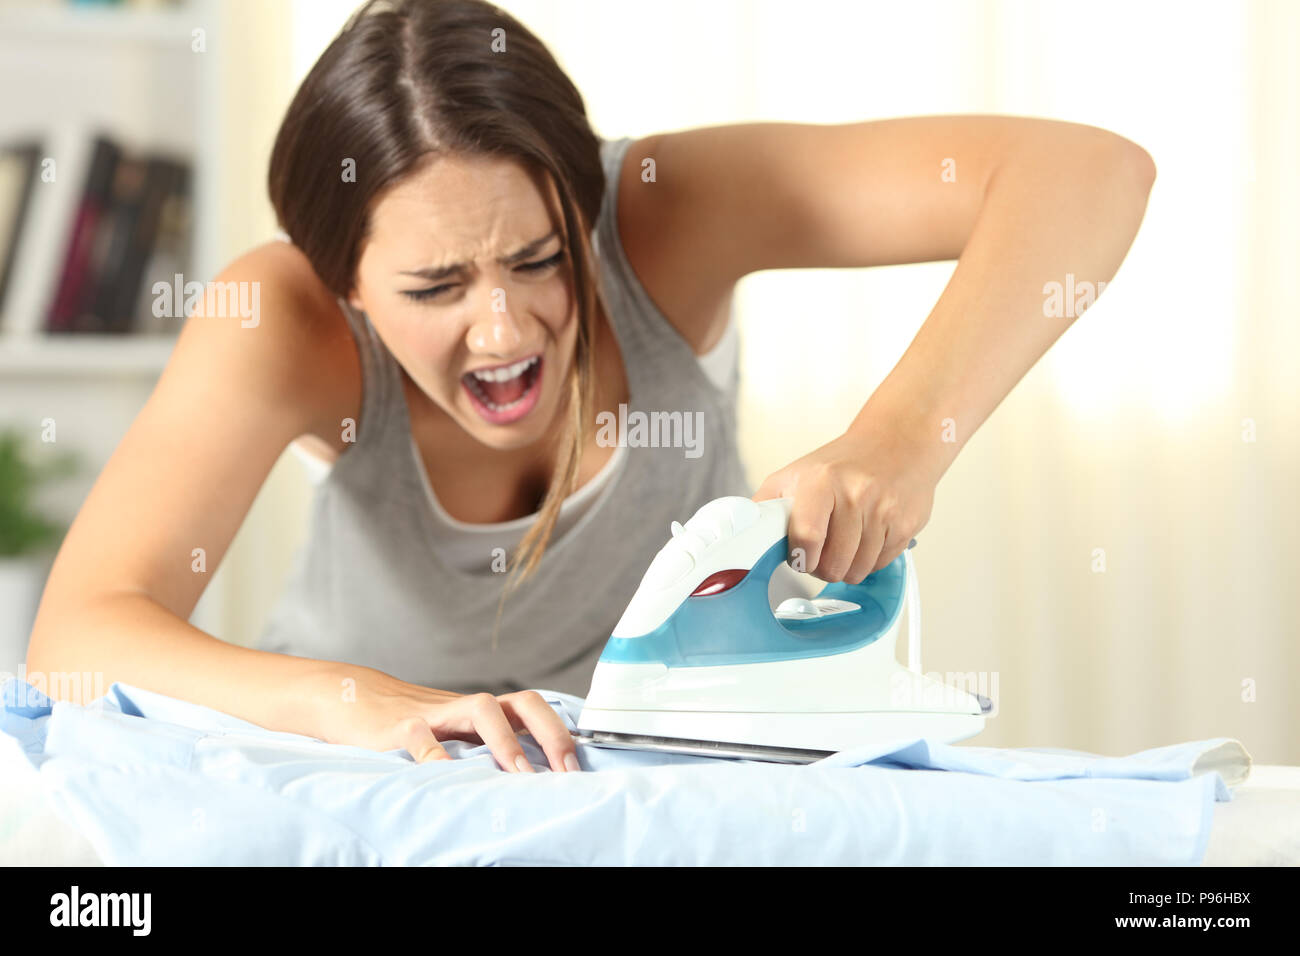 Woman burning a finger with a smoothing iron at home Stock Photo